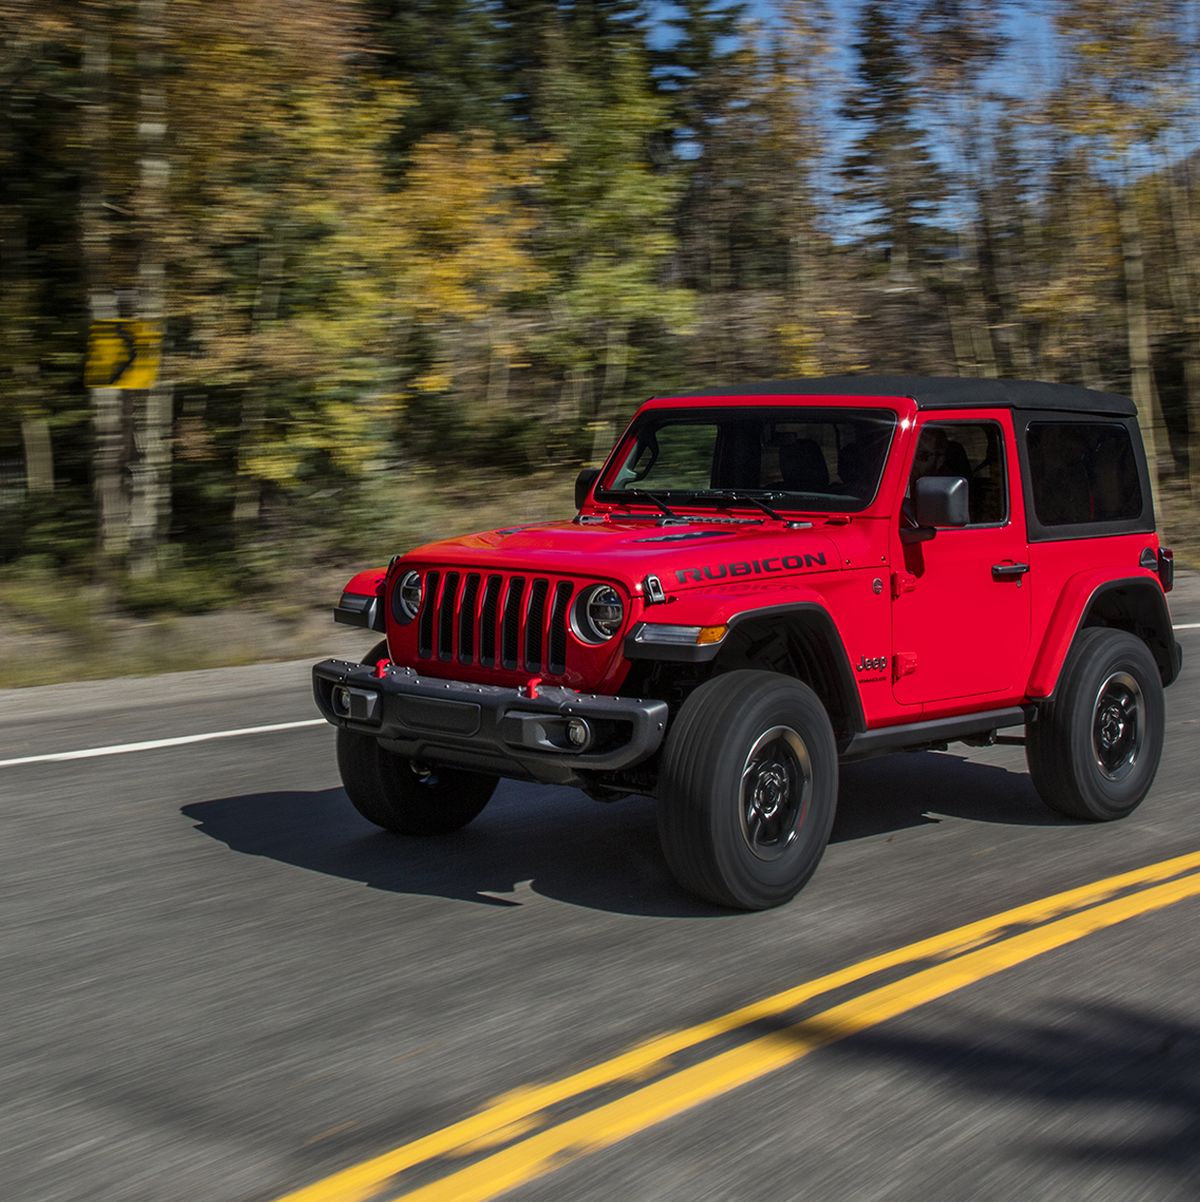 2018 Jeep Wrangler JK Unlimited Rubicon: The First Three Years